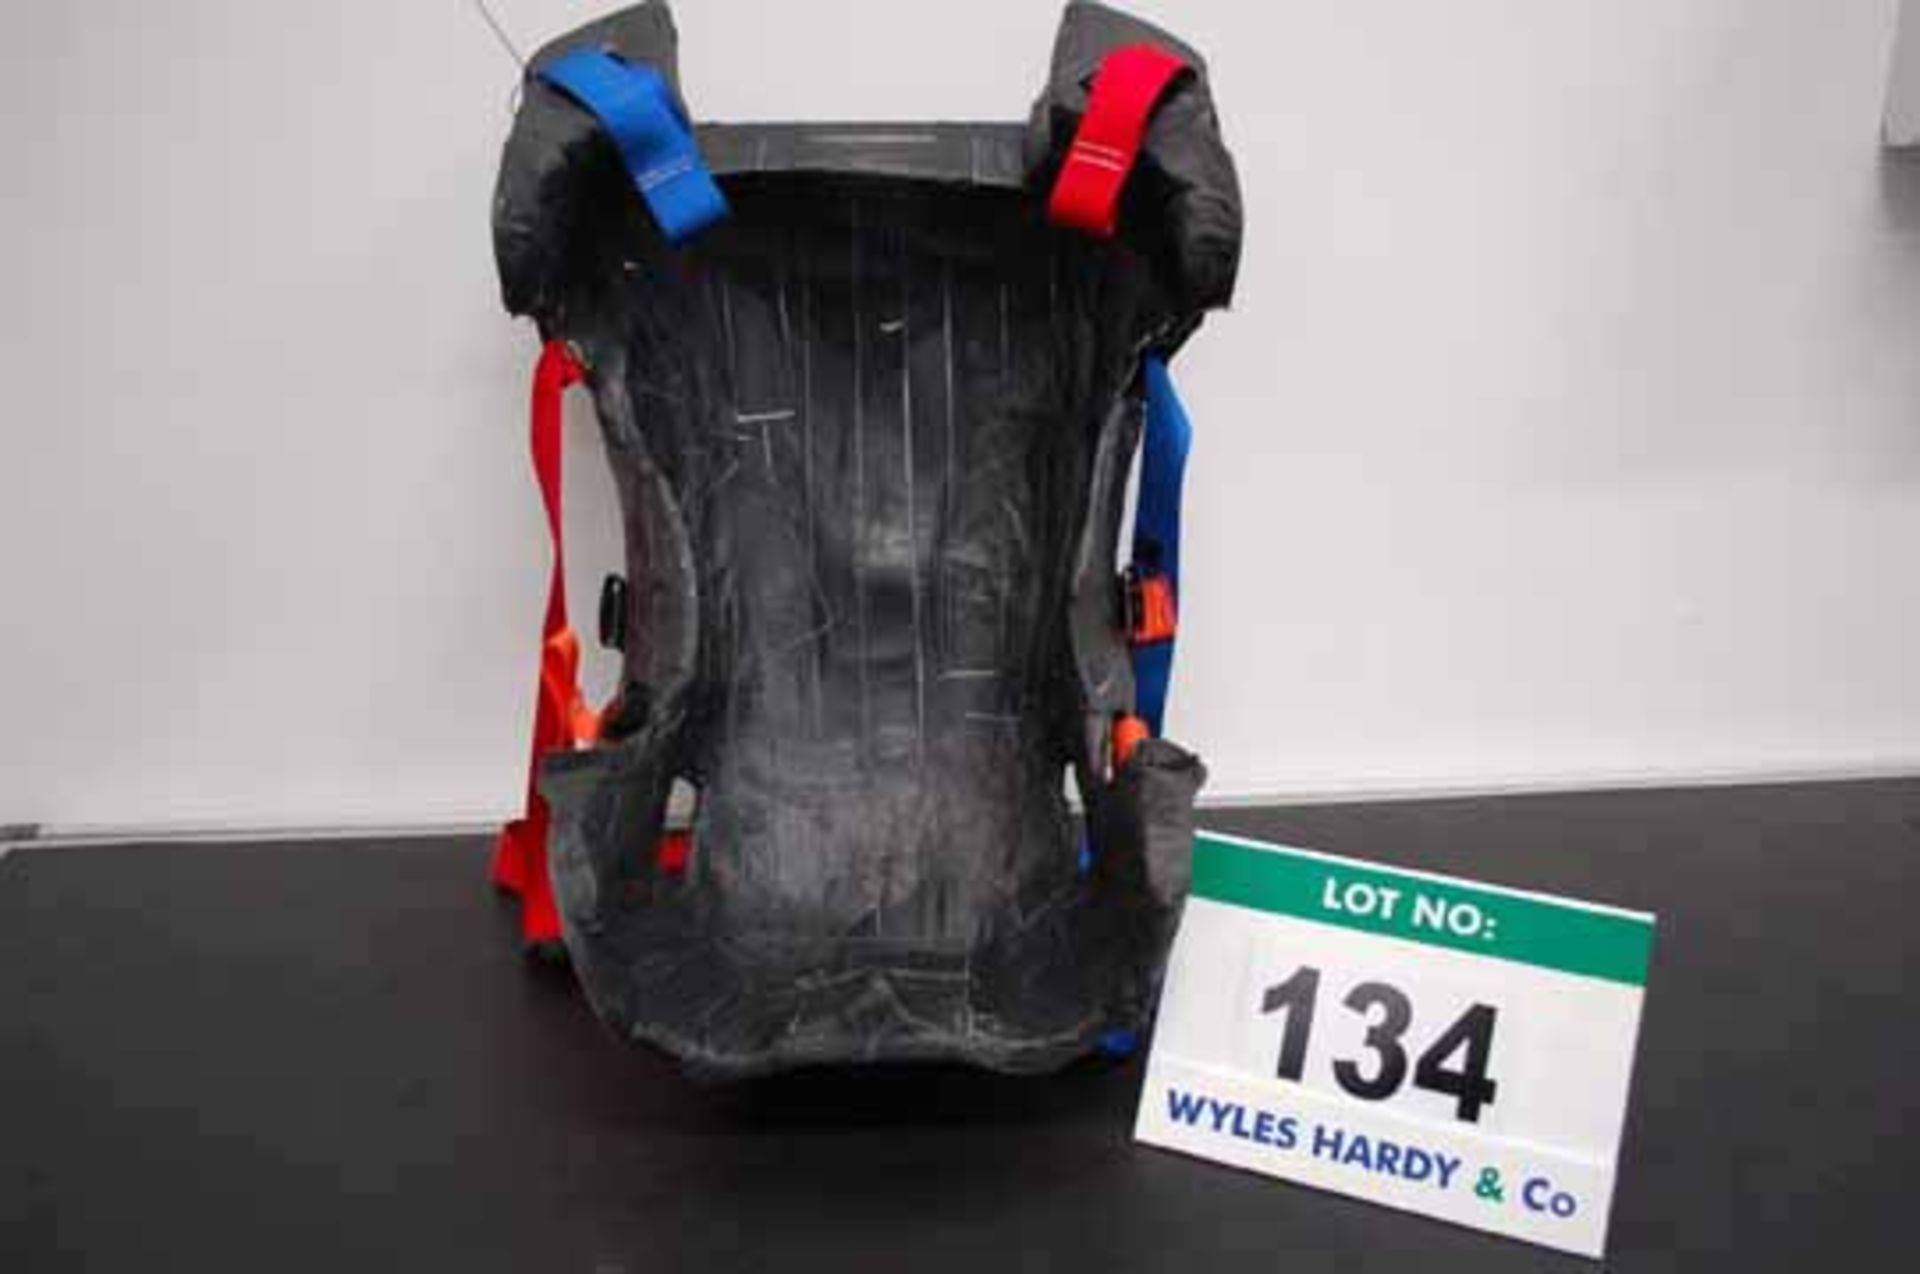 A Carbon Fibre Drivers Seat, Marcus Ericsson, with FIA Medical Strapping, No. Unknown